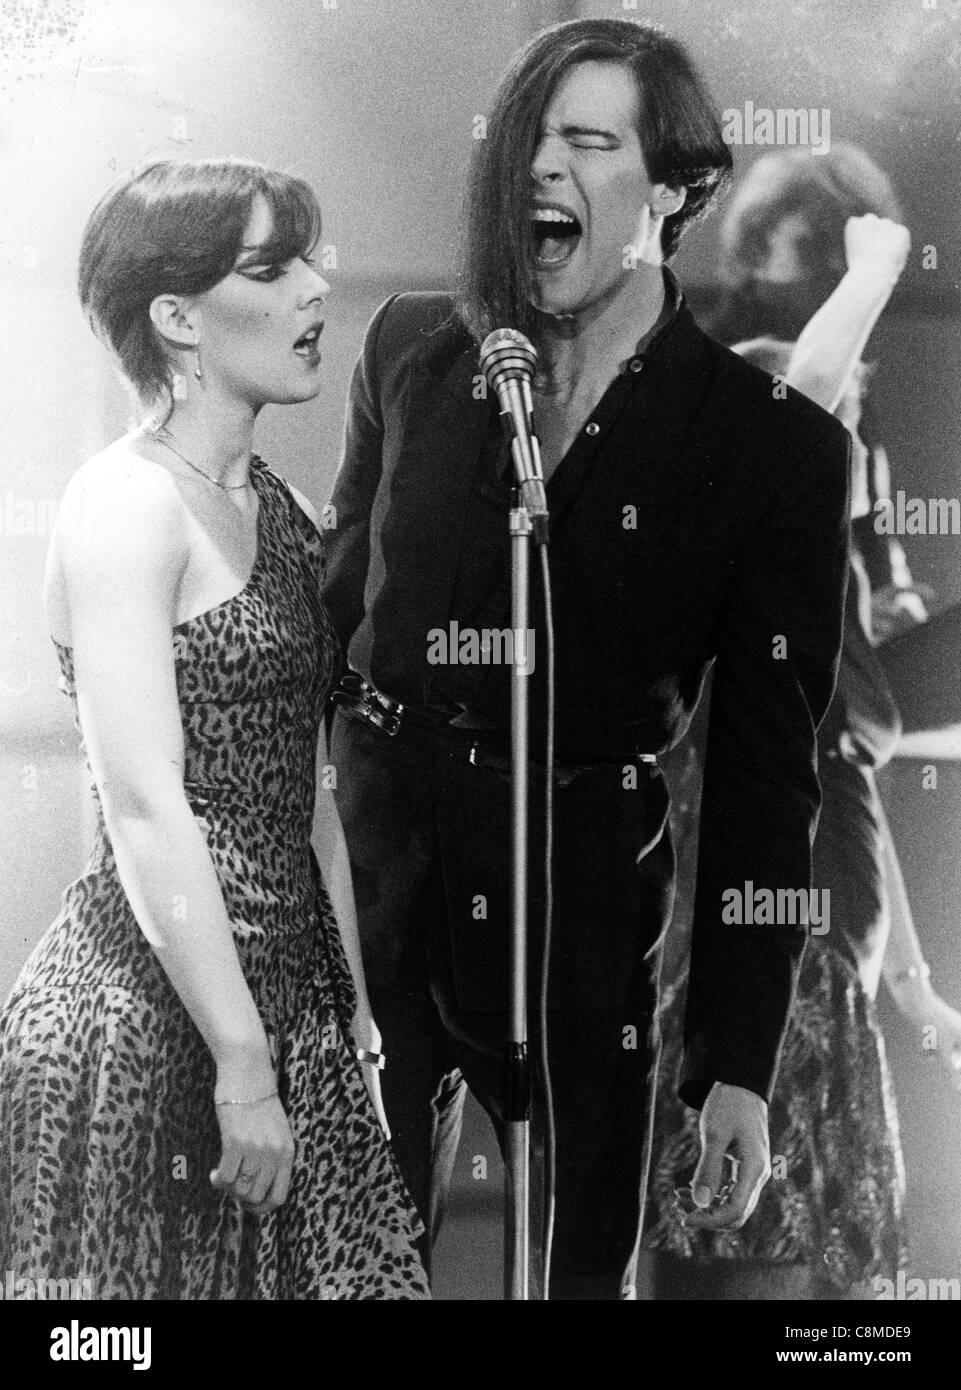 HUMAN LEAGUE UK pop group in 1982 with Phil Oakley and Joanne Cathrall.  Photo Laurens van Houten Stock Photo - Alamy